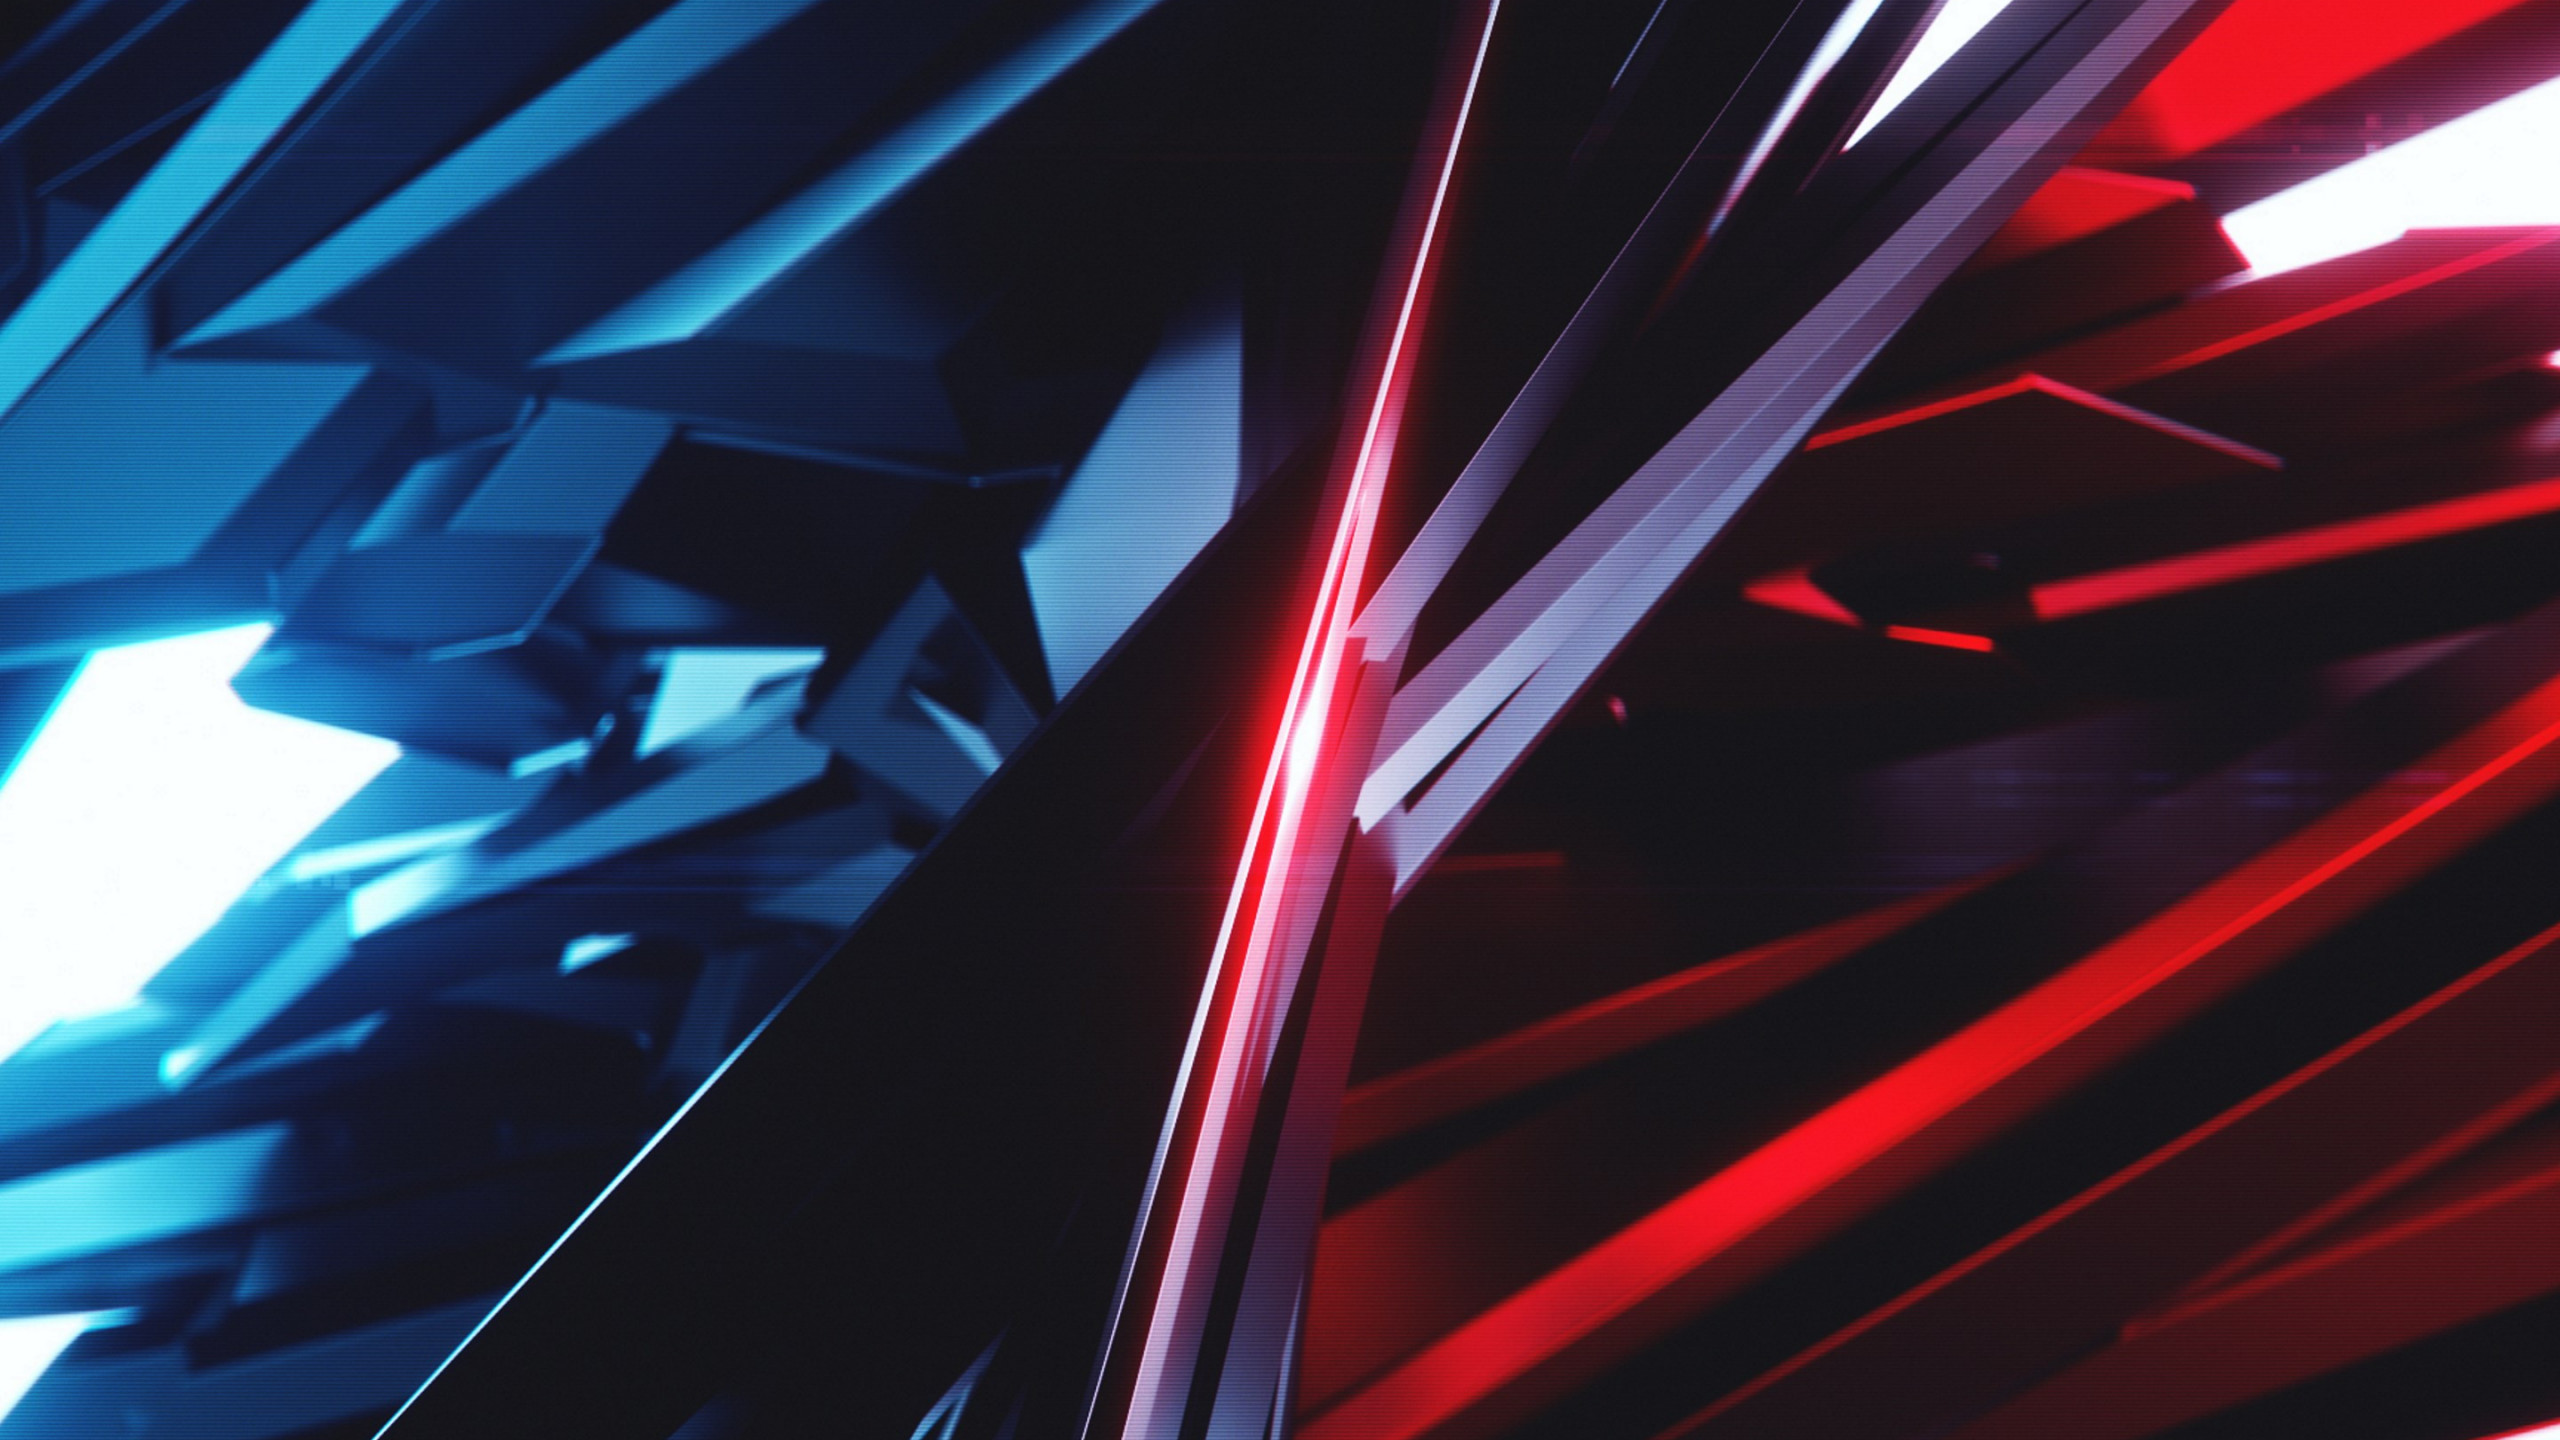 Download wallpaper: Abstract 3D: Blue vs Red 2560x1440